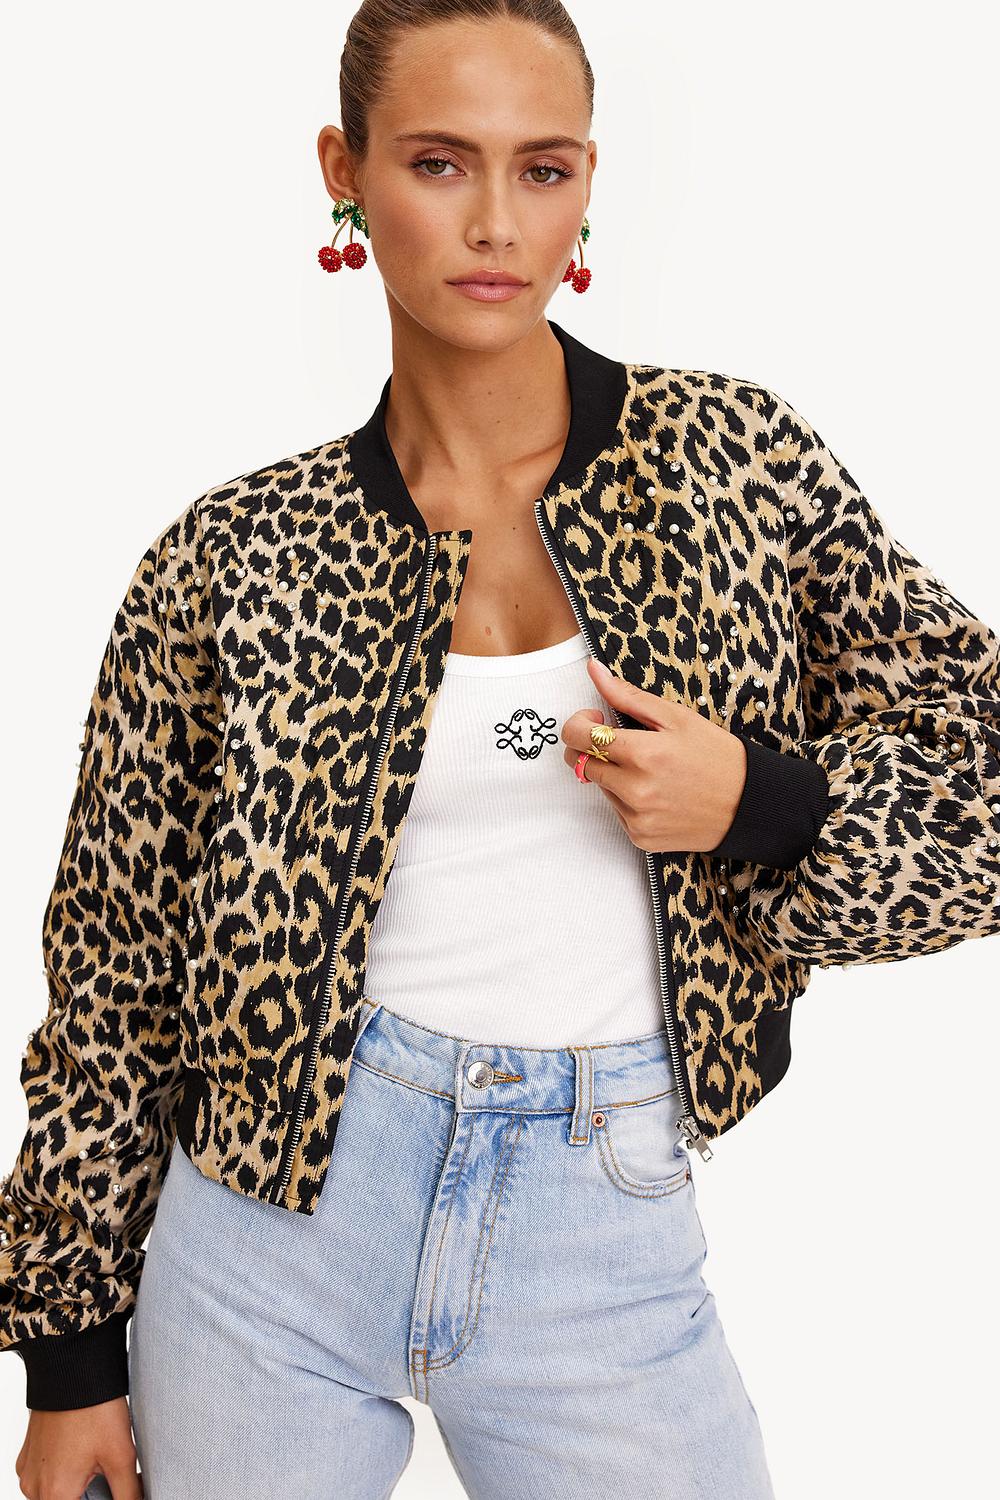 Brown bomber jacket with leopard print